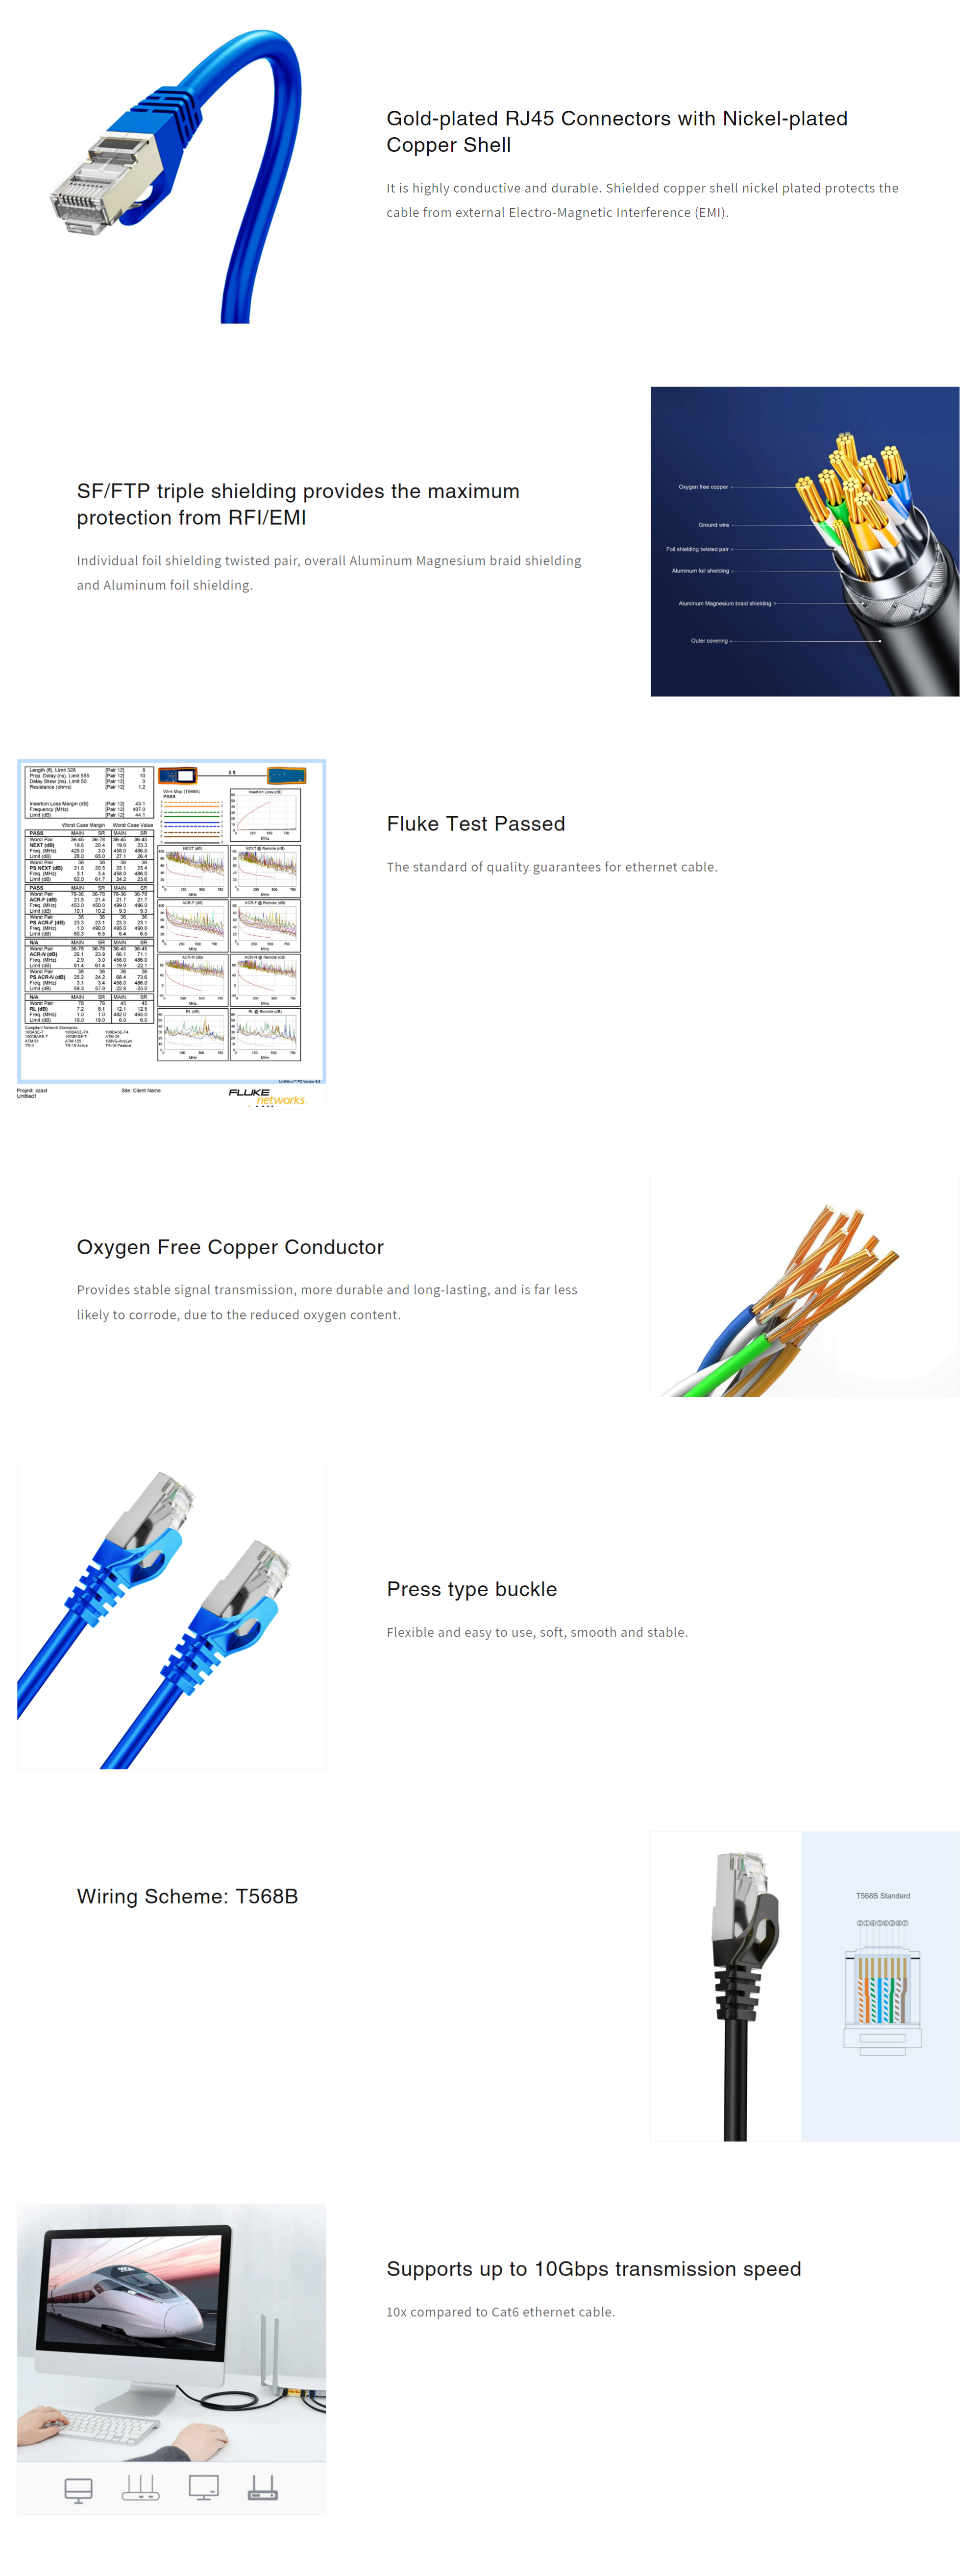 A large marketing image providing additional information about the product Cruxtec Cat7 5m 10GbE SF/FTP Triple Shielding Network Cable Blue - Additional alt info not provided